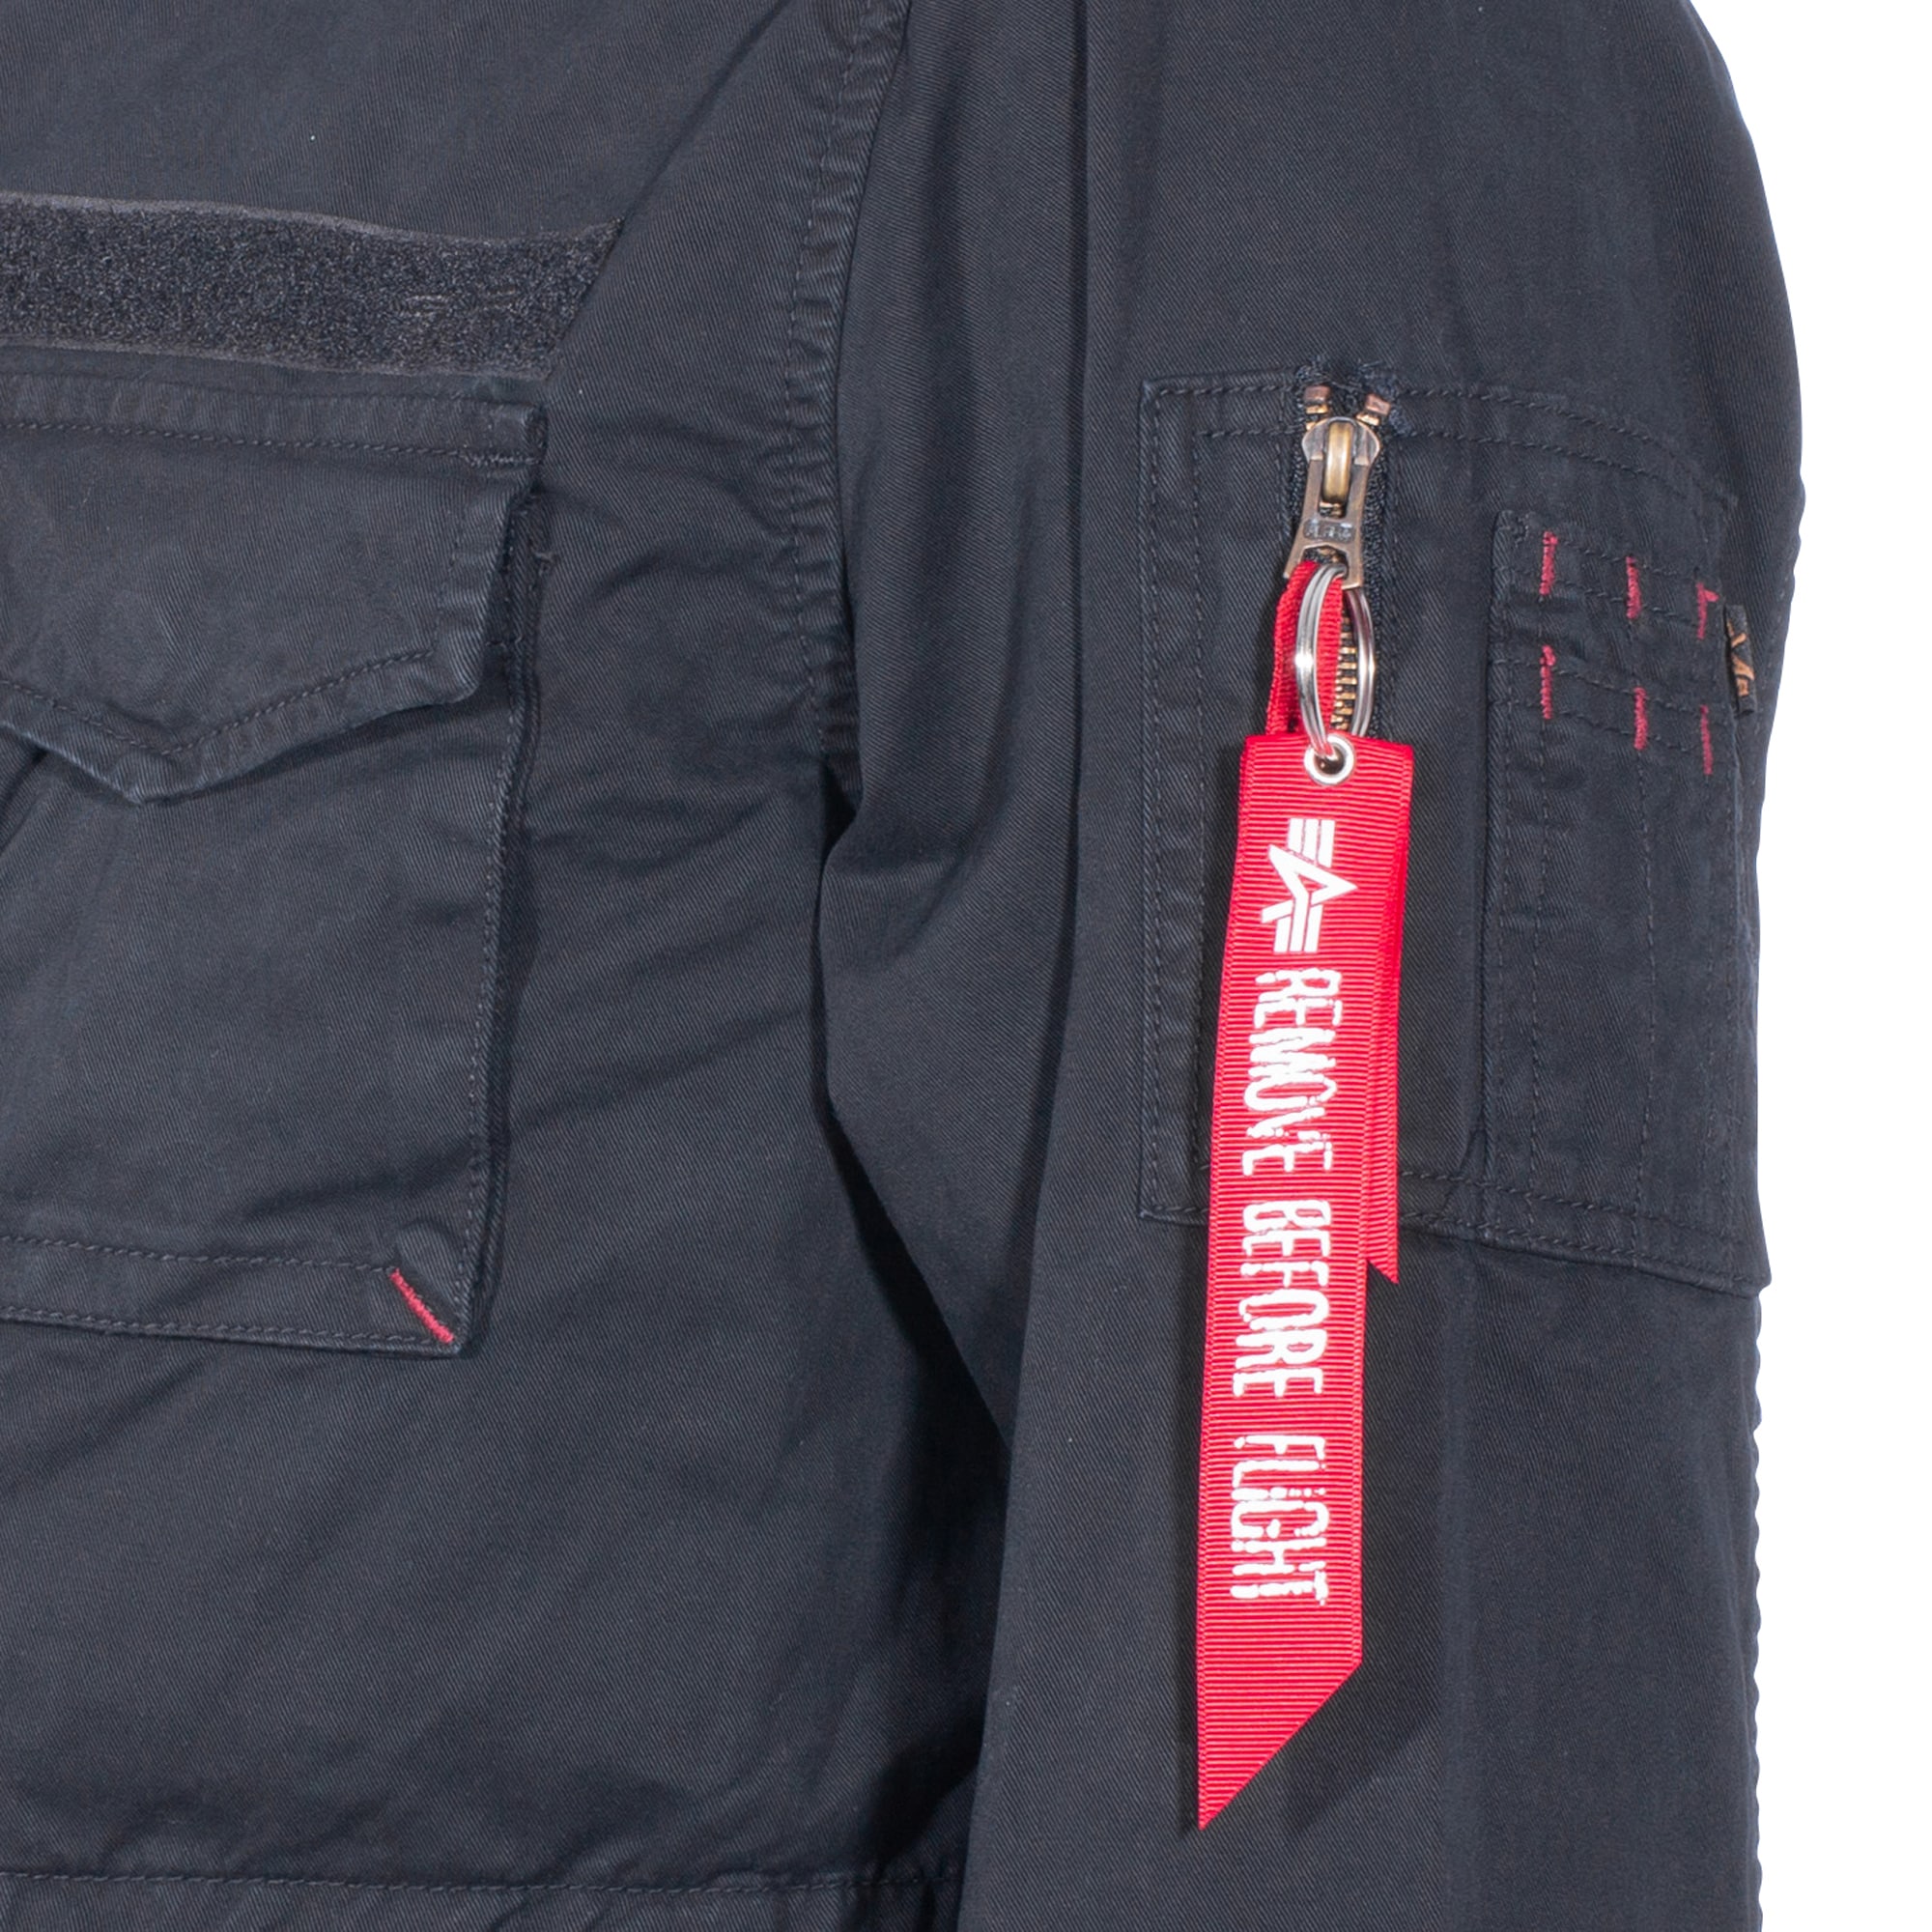 Purchase the Alpha Industries Field by A black Jacket Huntington